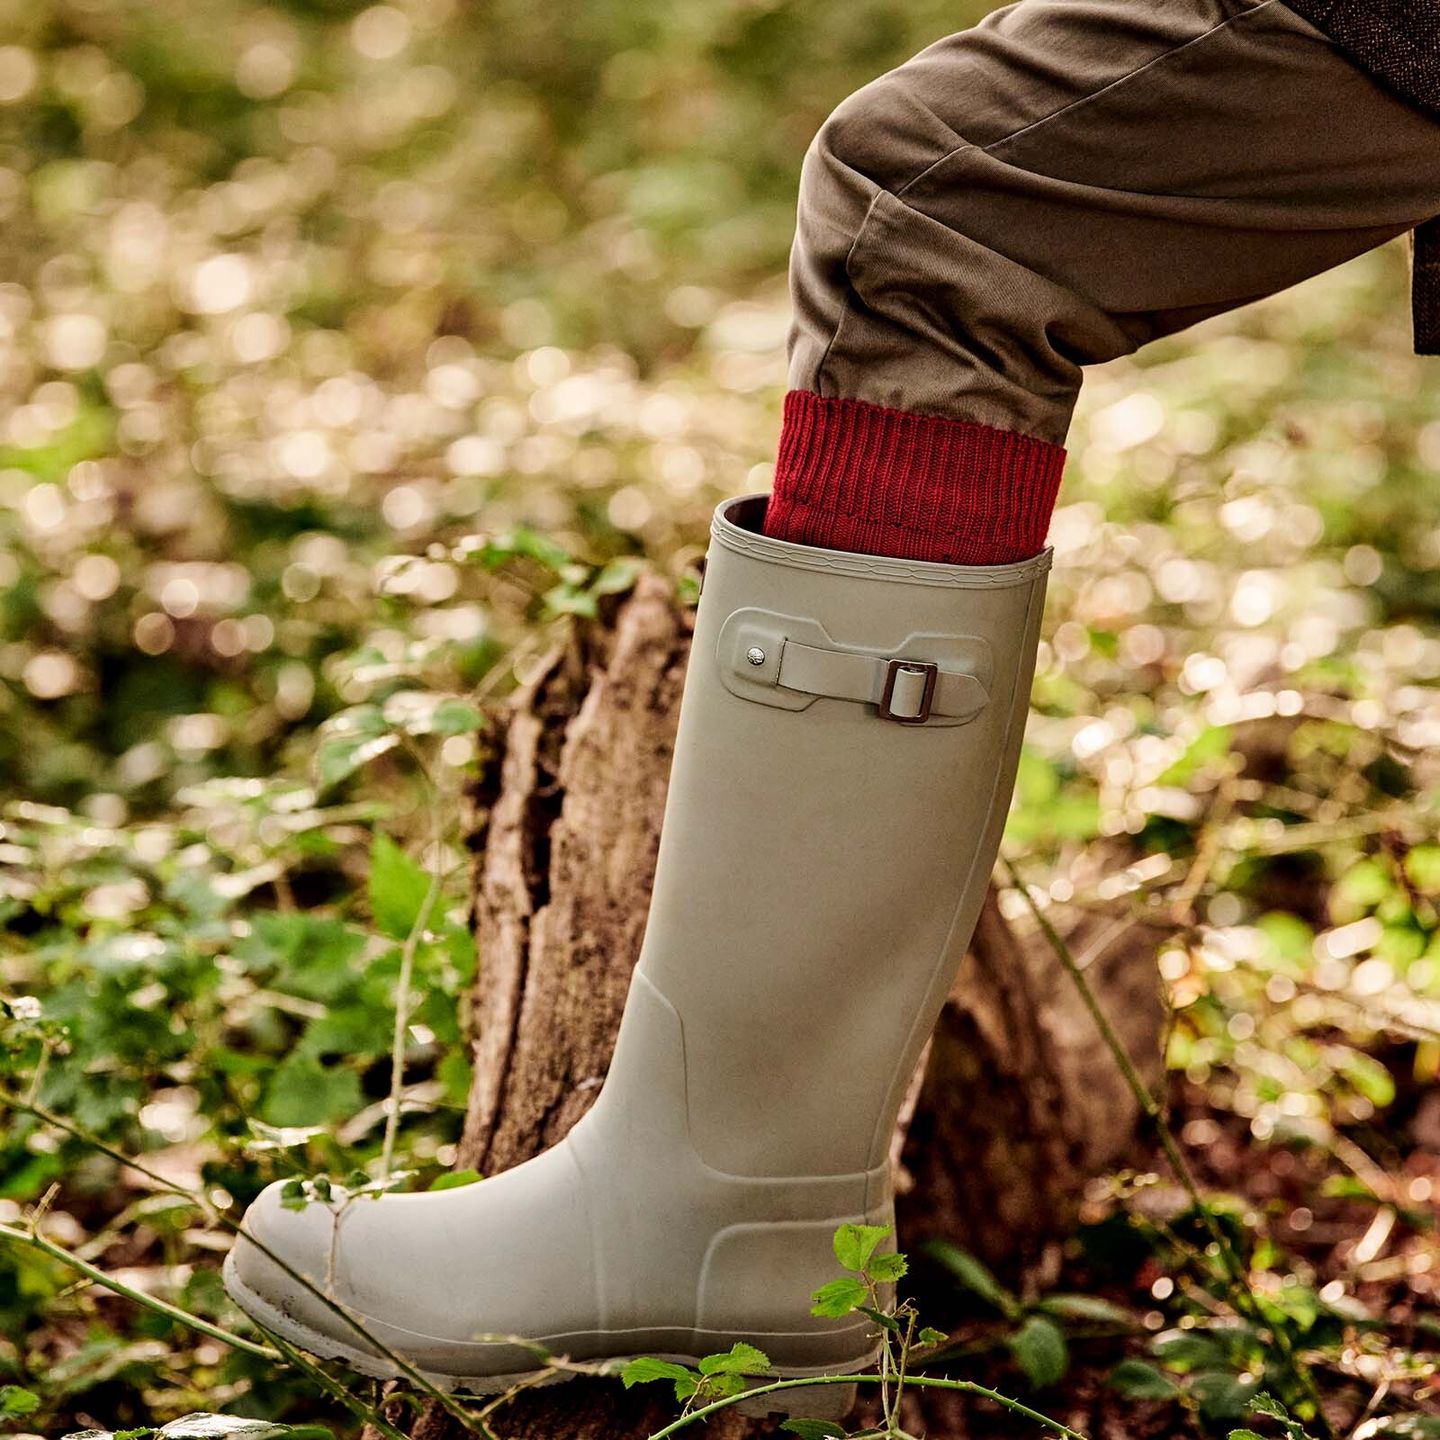 A man standing on a bark of wood in a forest, wearing off white wellies and red boot socks